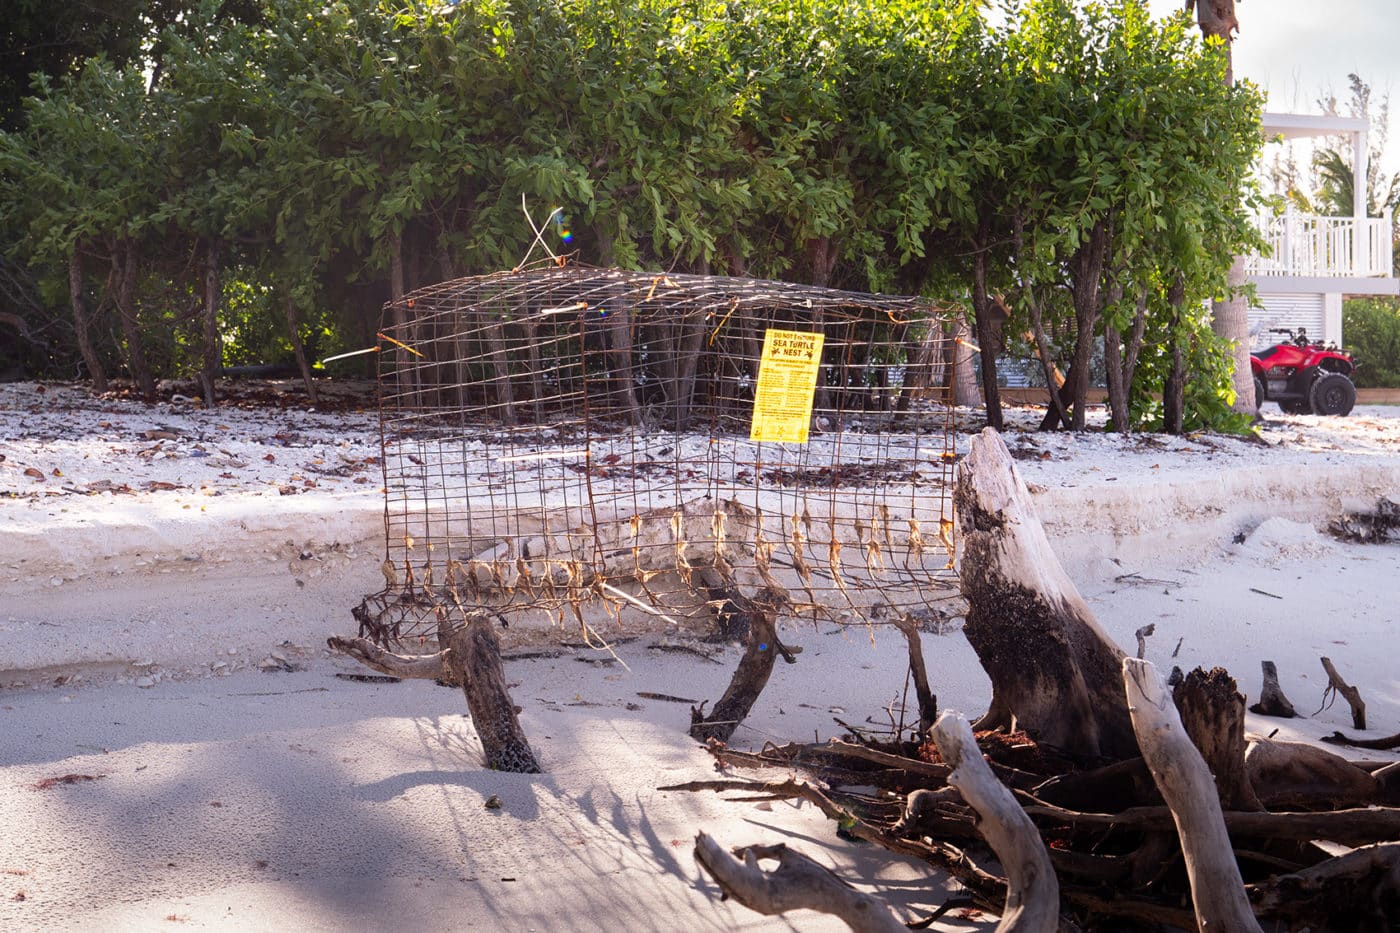 A second view of the caged sea turtle nest with the bottom washed out